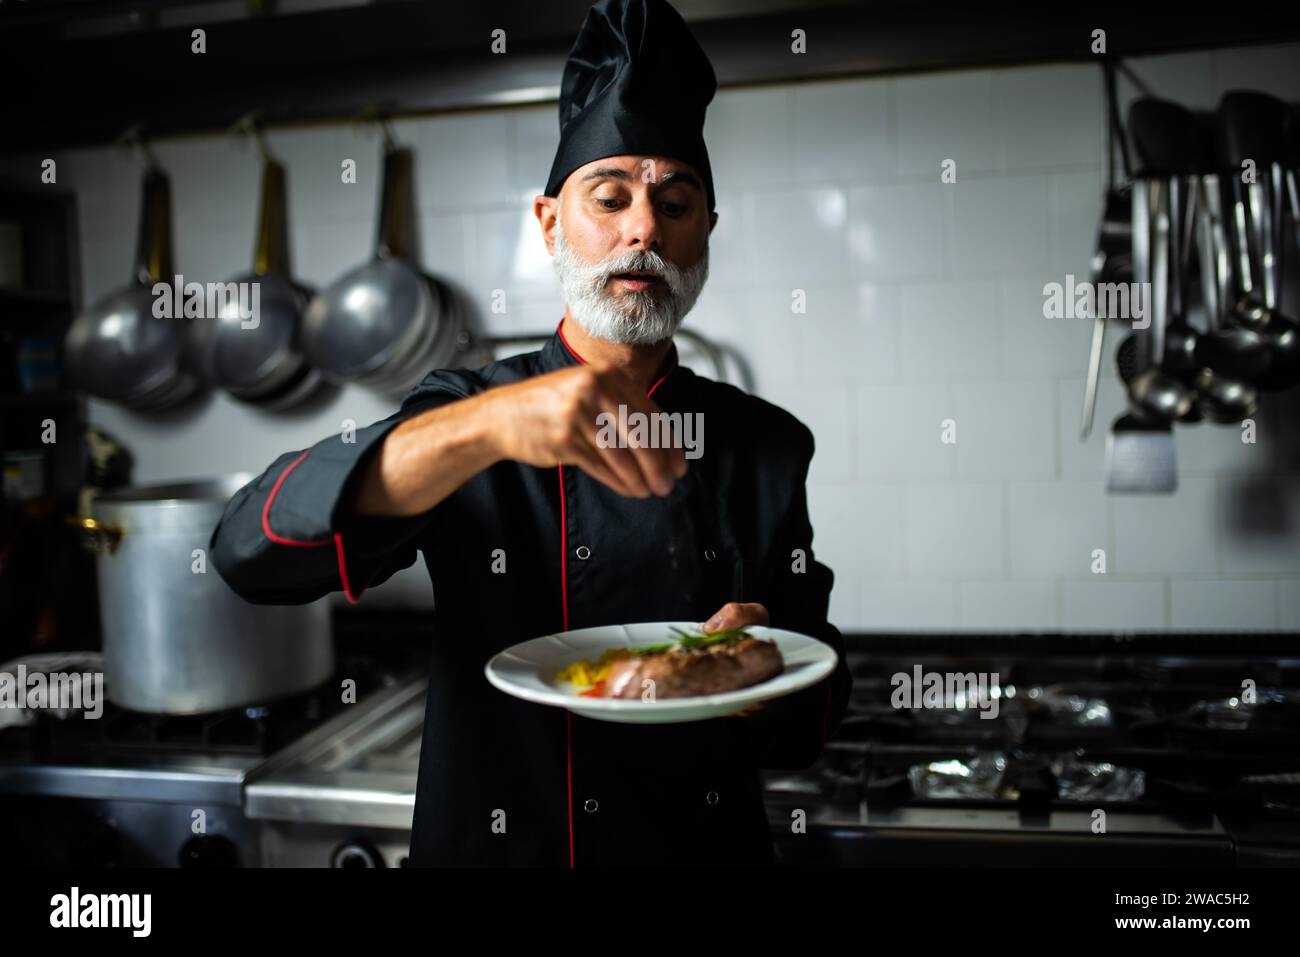 Mature chef in uniform focuses on garnishing a plated meal in a commercial kitchen setting Stock Photo